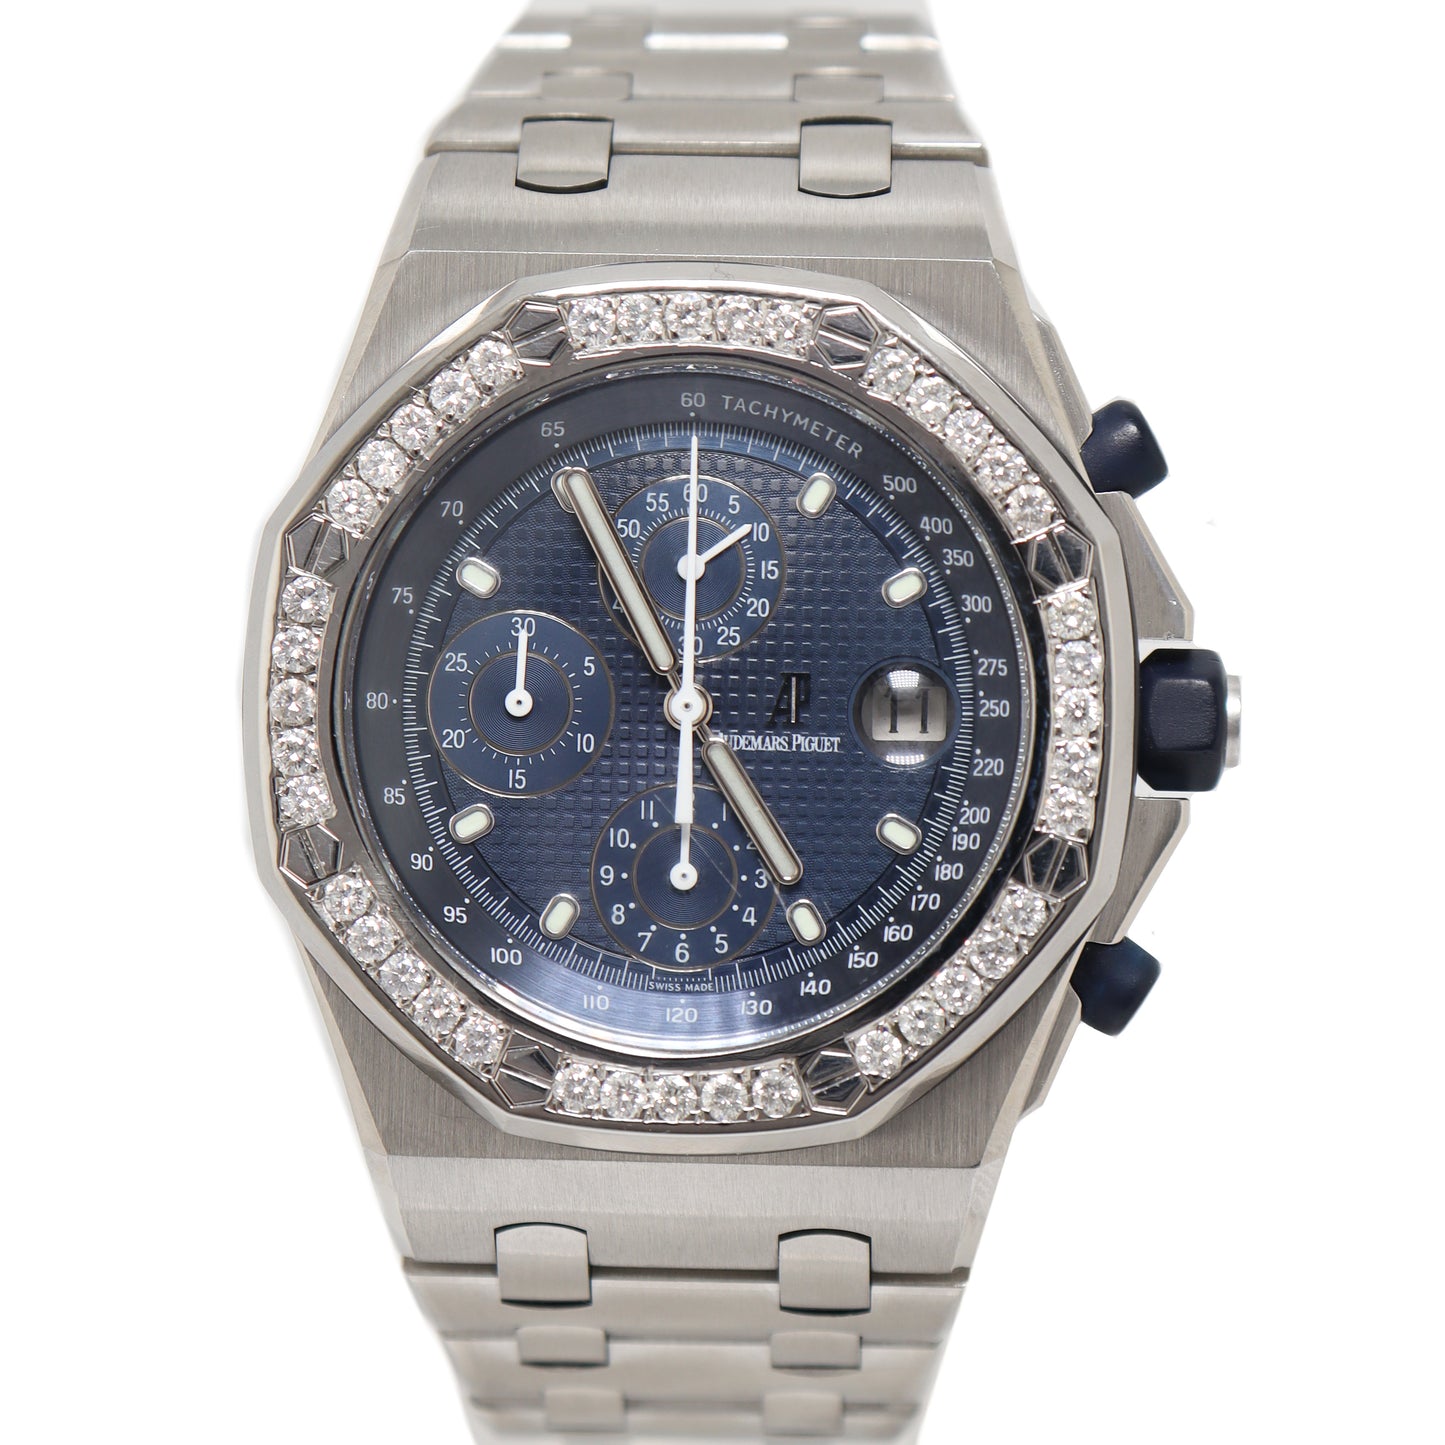 Audemars Piguet Royal Oak Offshore Stainless Steel 42mm Blue Chronograph "Petite Tapisserie" Dial Watch Reference# 26237ST.OO.1000ST.01 - Happy Jewelers Fine Jewelry Lifetime Warranty